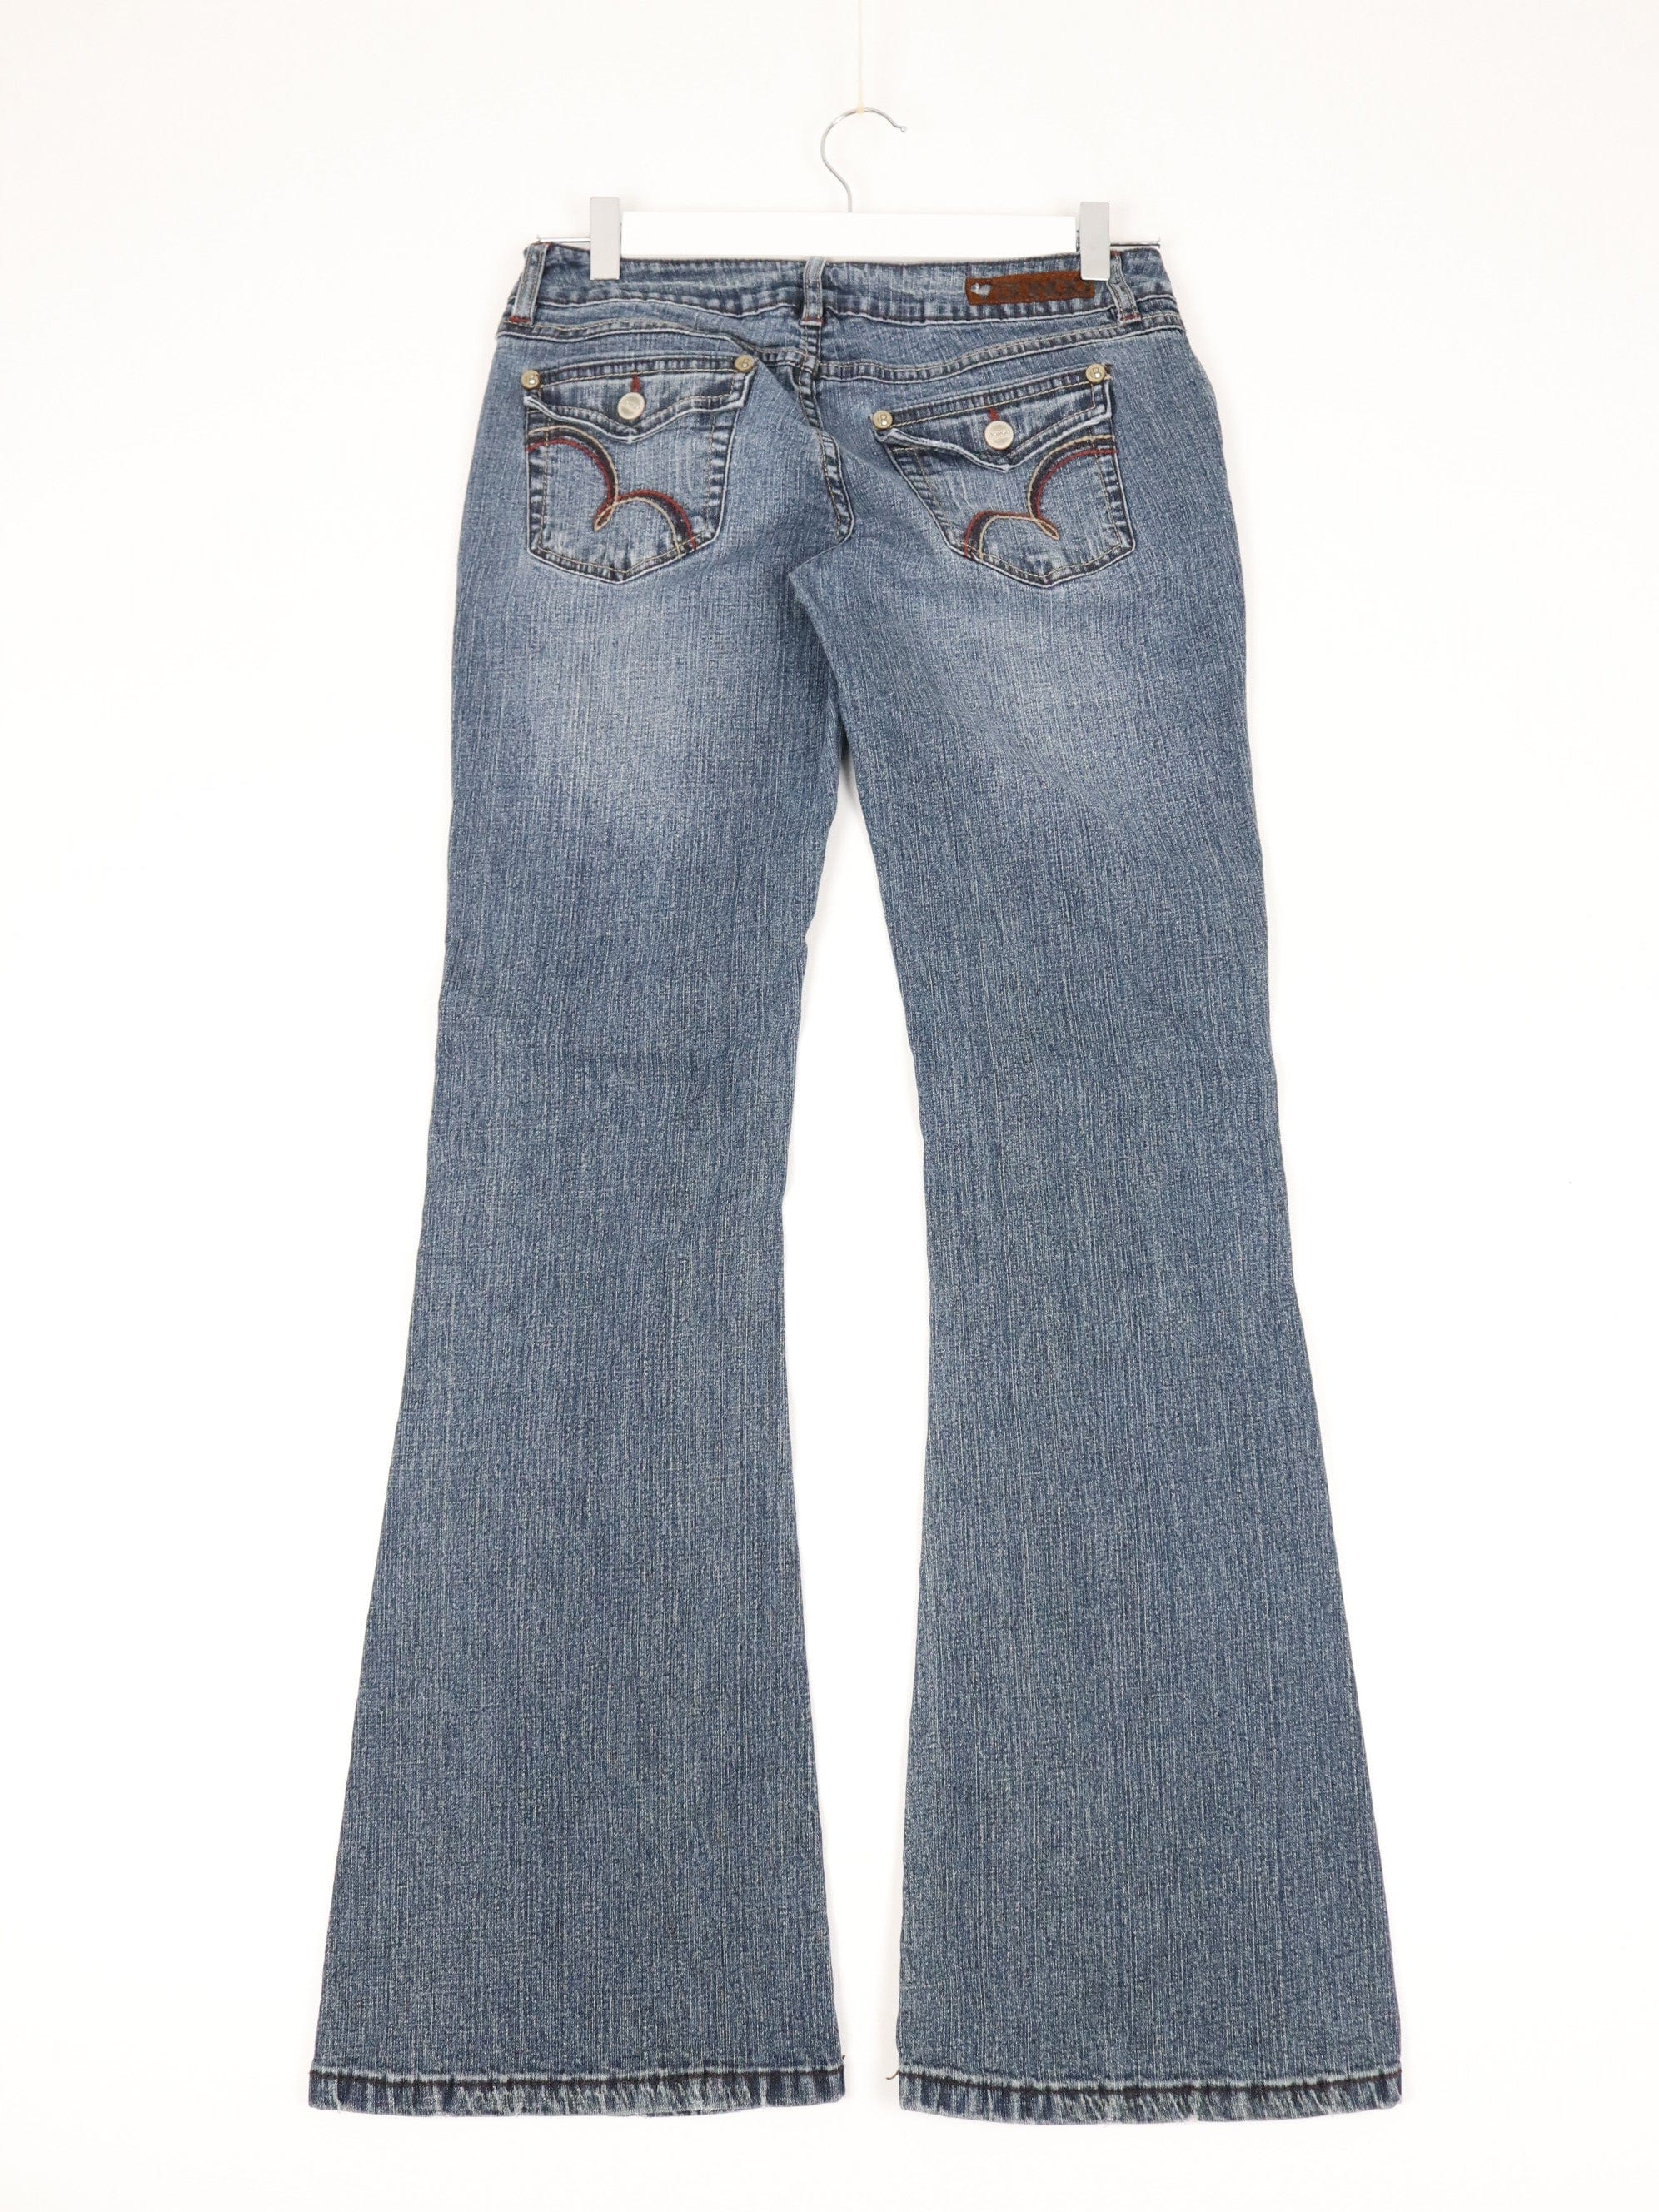 Vintage High-Waist Flare Jeans with Front Patch Pockets - 32